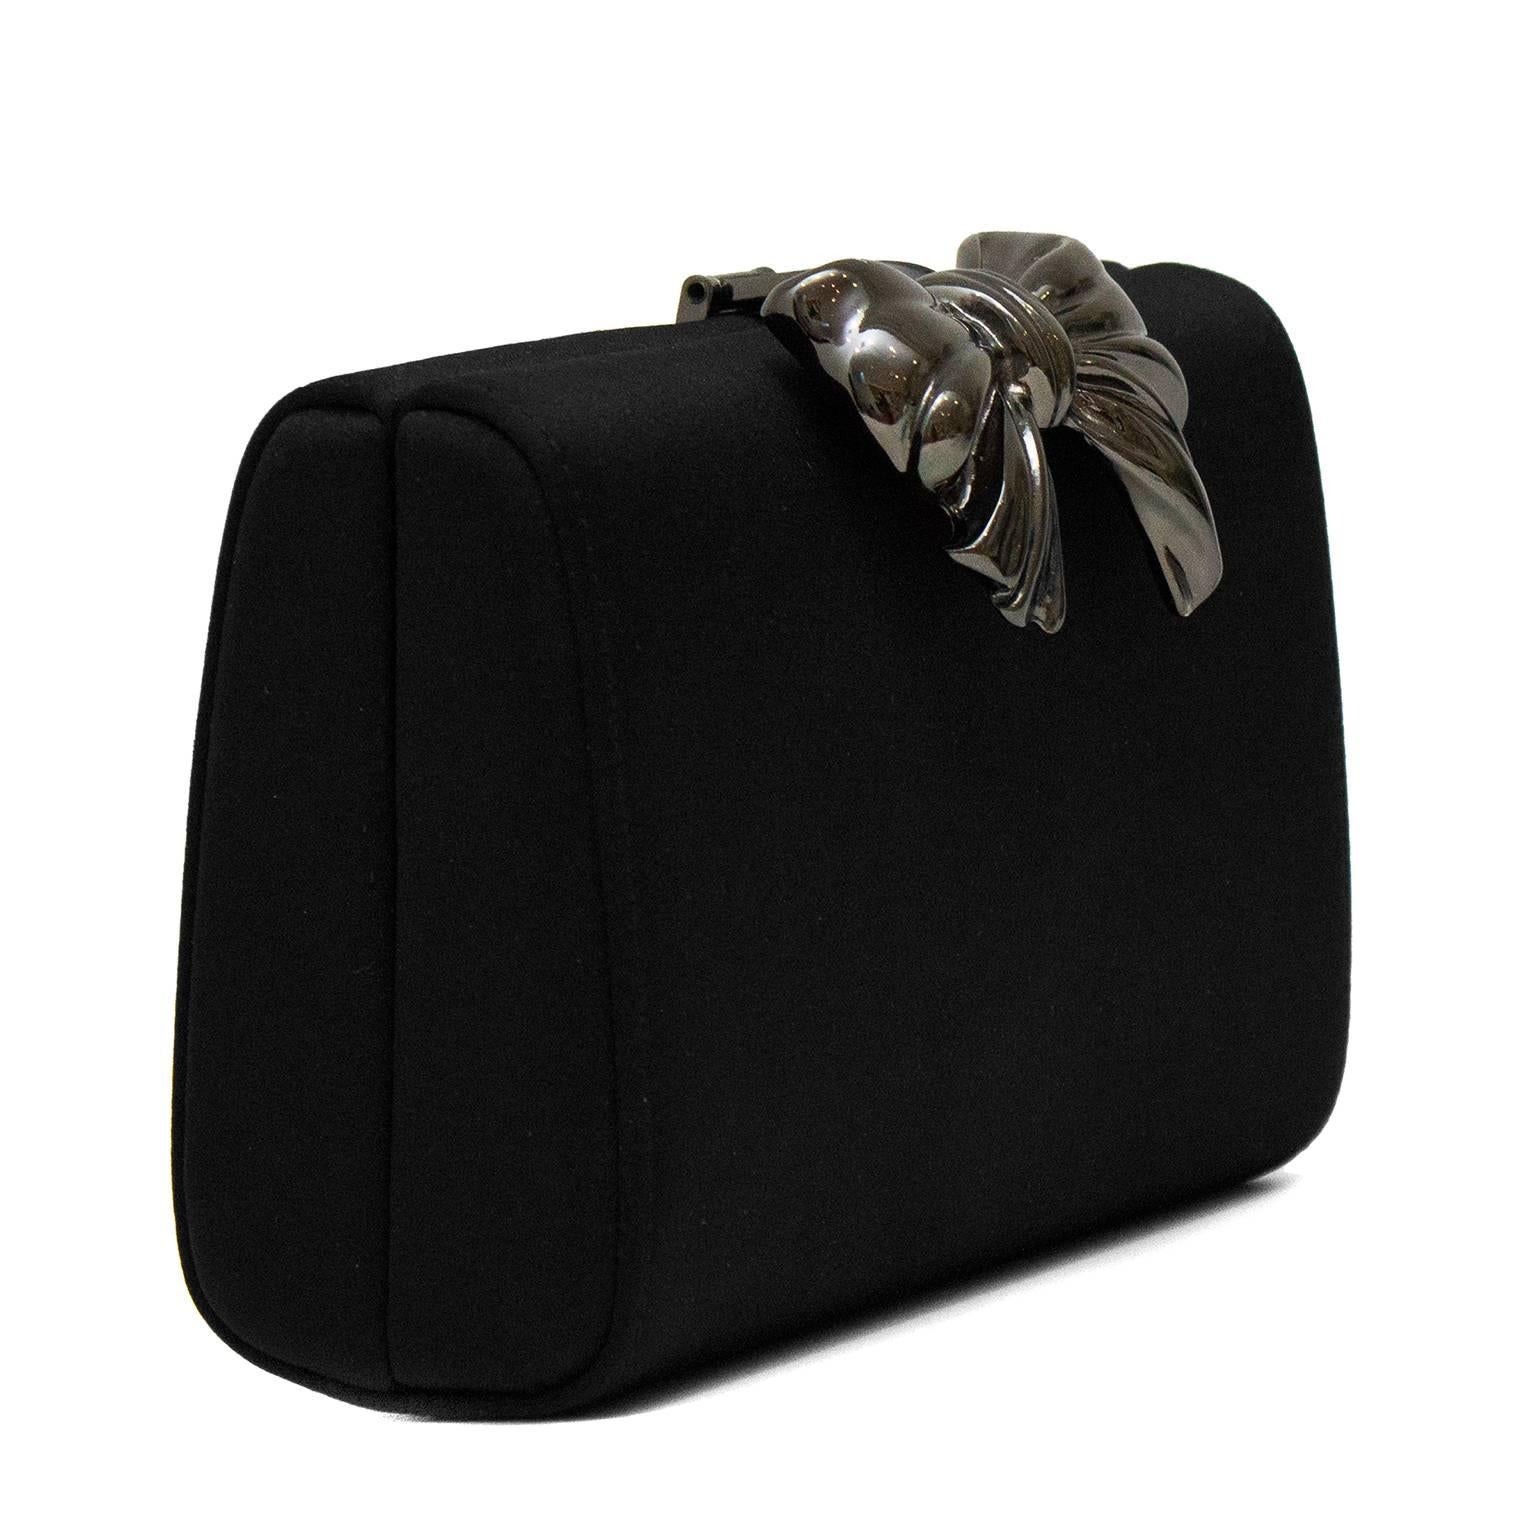 Red carpet ready stunning black satin clutch by Italian designer, Rodo. Silver metal bow detail at clasp. Clean interior with Rodo logo lining. Hidden 23